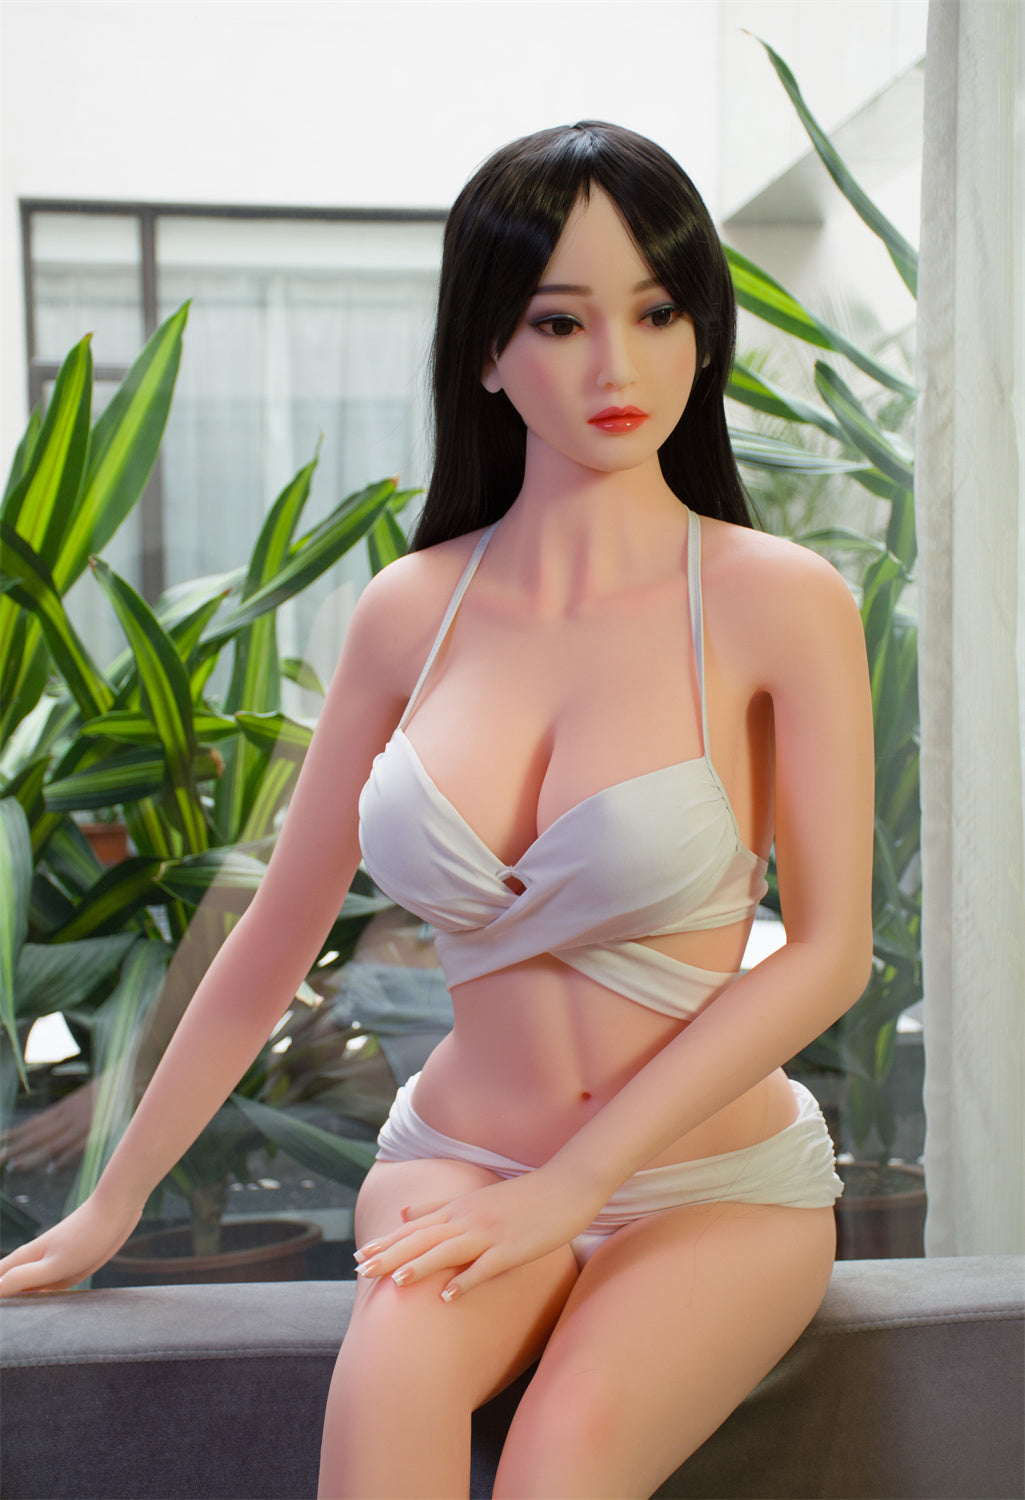 Everly #123-4 Sex Doll Big Breasts Realistic Love Doll TPE Sex Doll